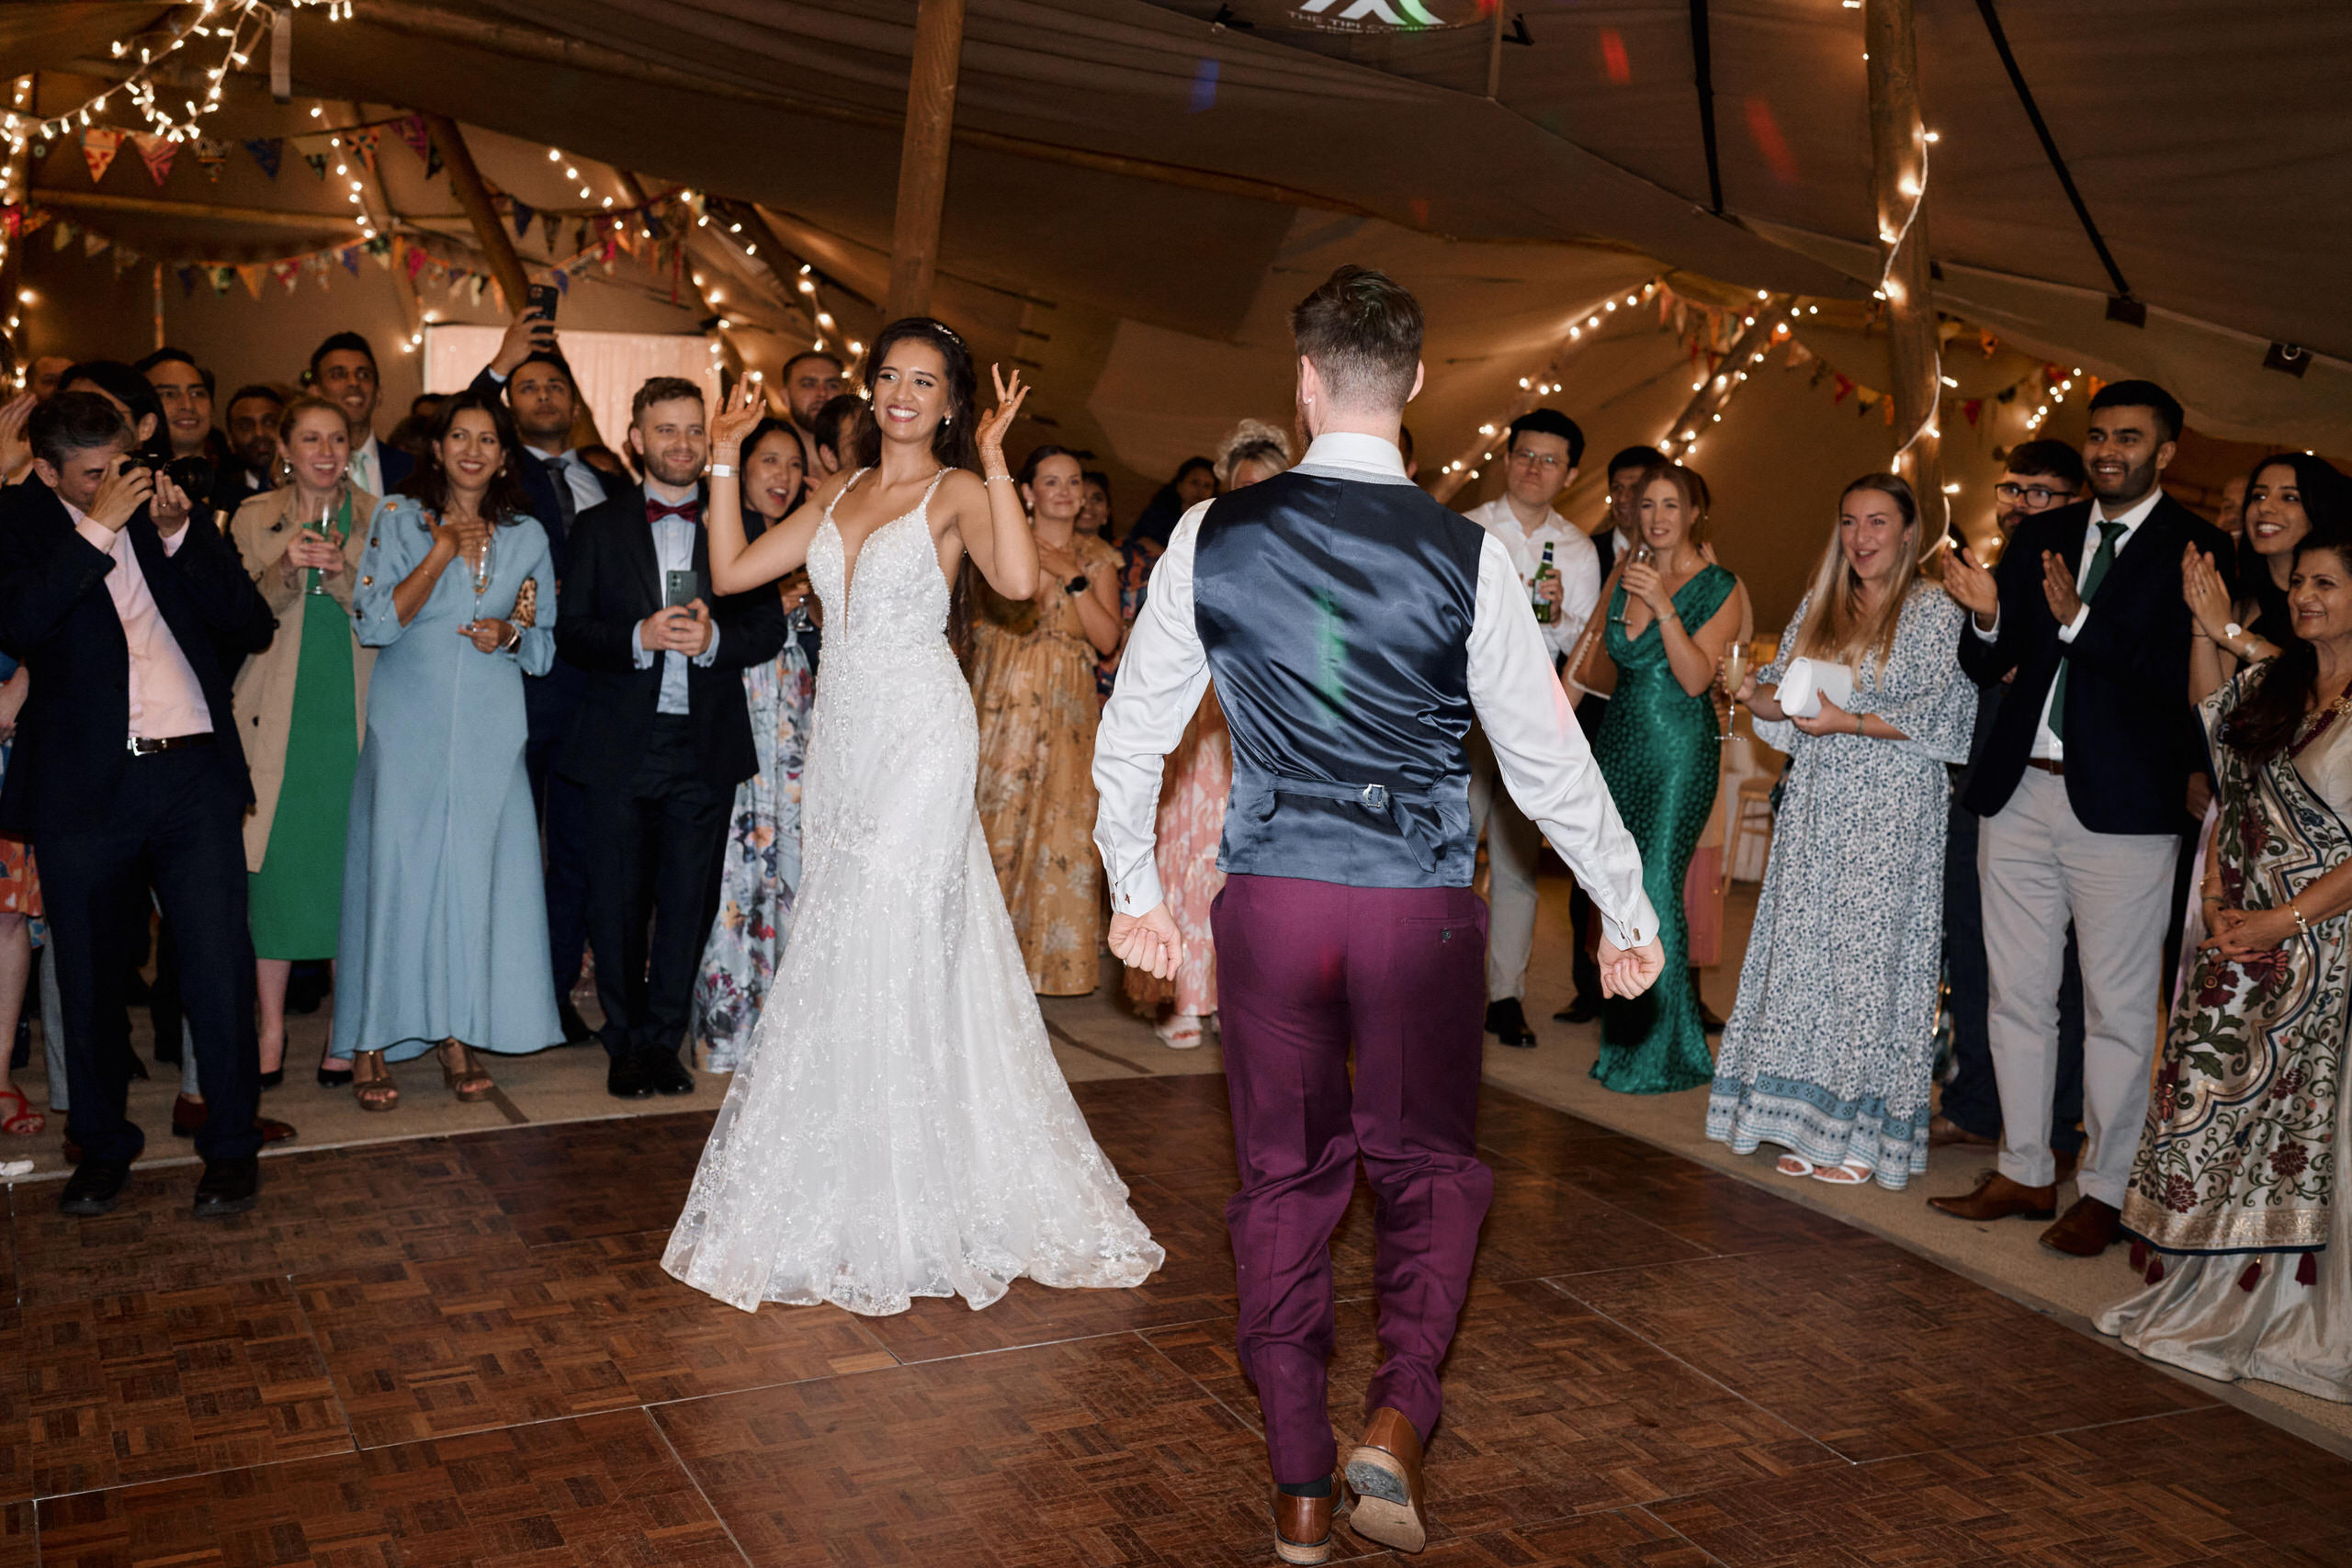 A couple is dancing on a wooden floor inside a tent at their wedding.